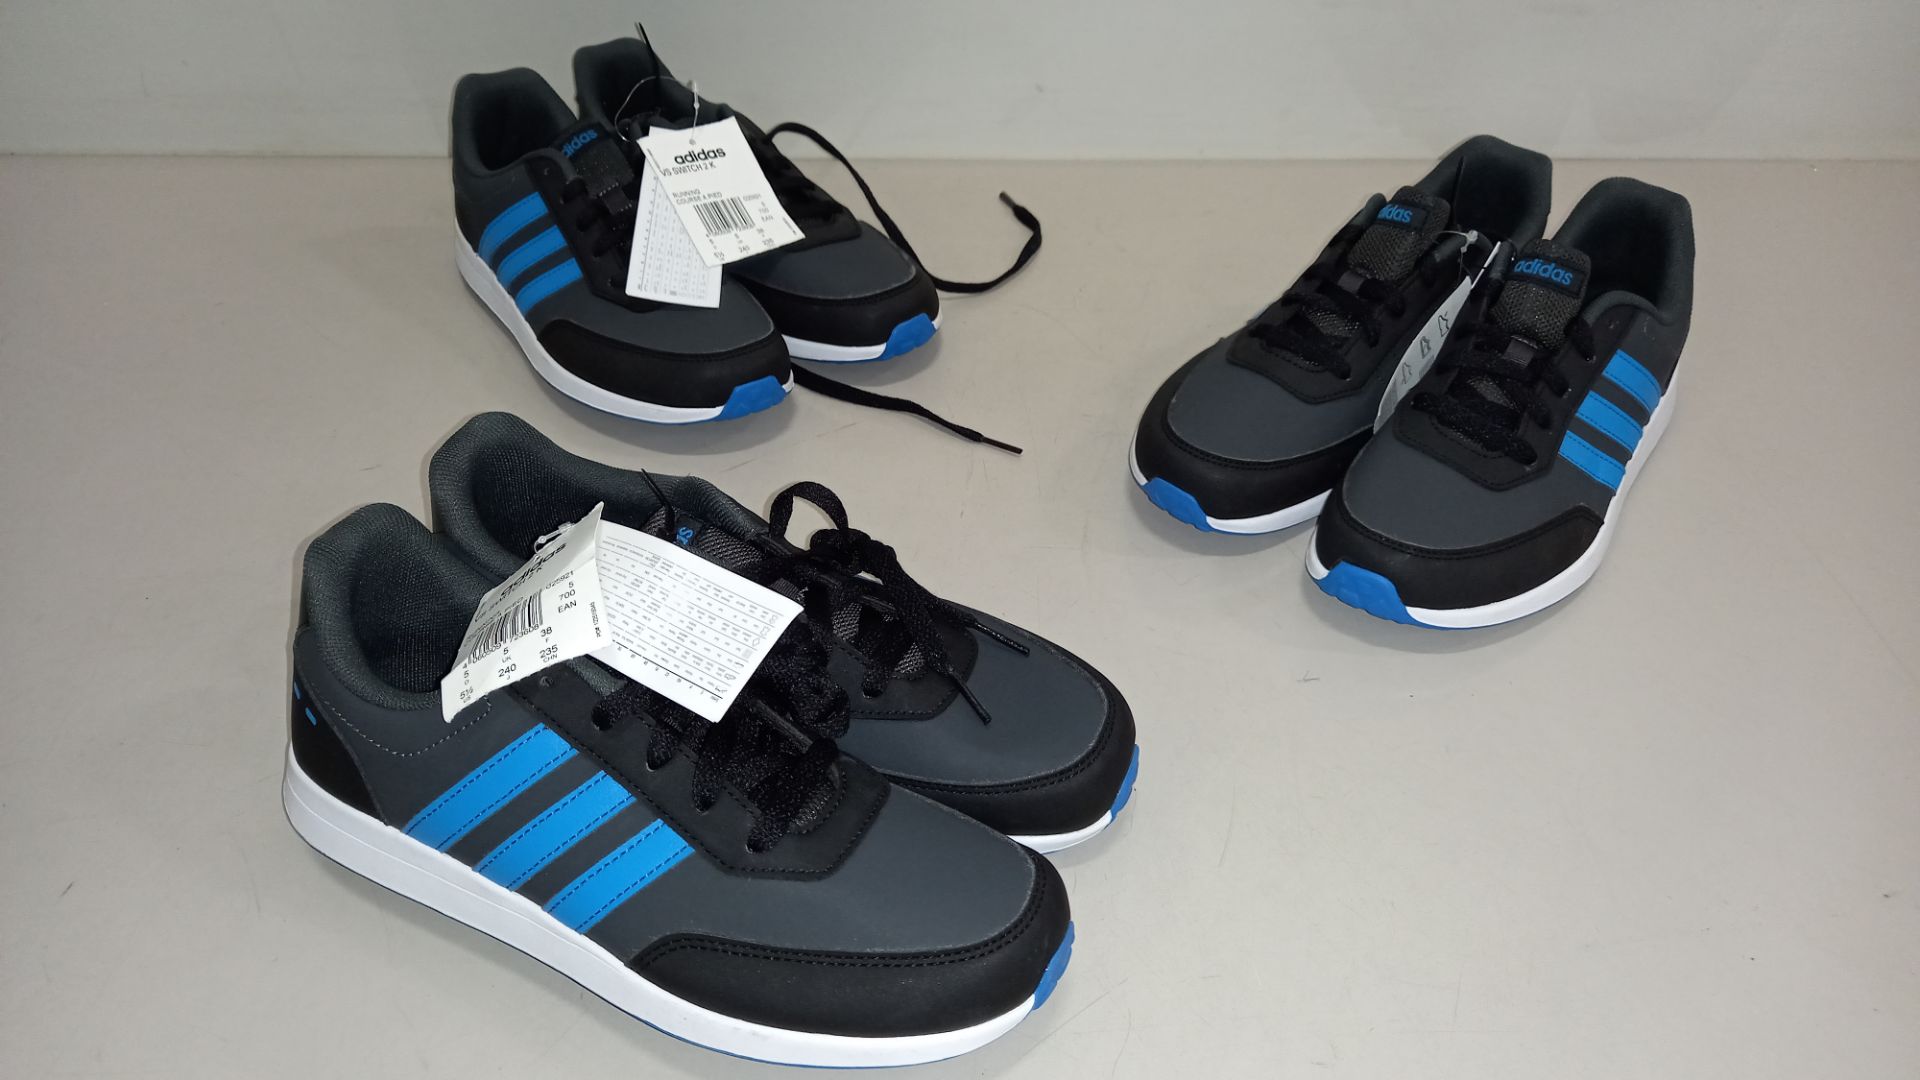 8 X BRAND NEW ADIDAS VS SWITCH 2 K RUNNING TRAINERS SIZE 5